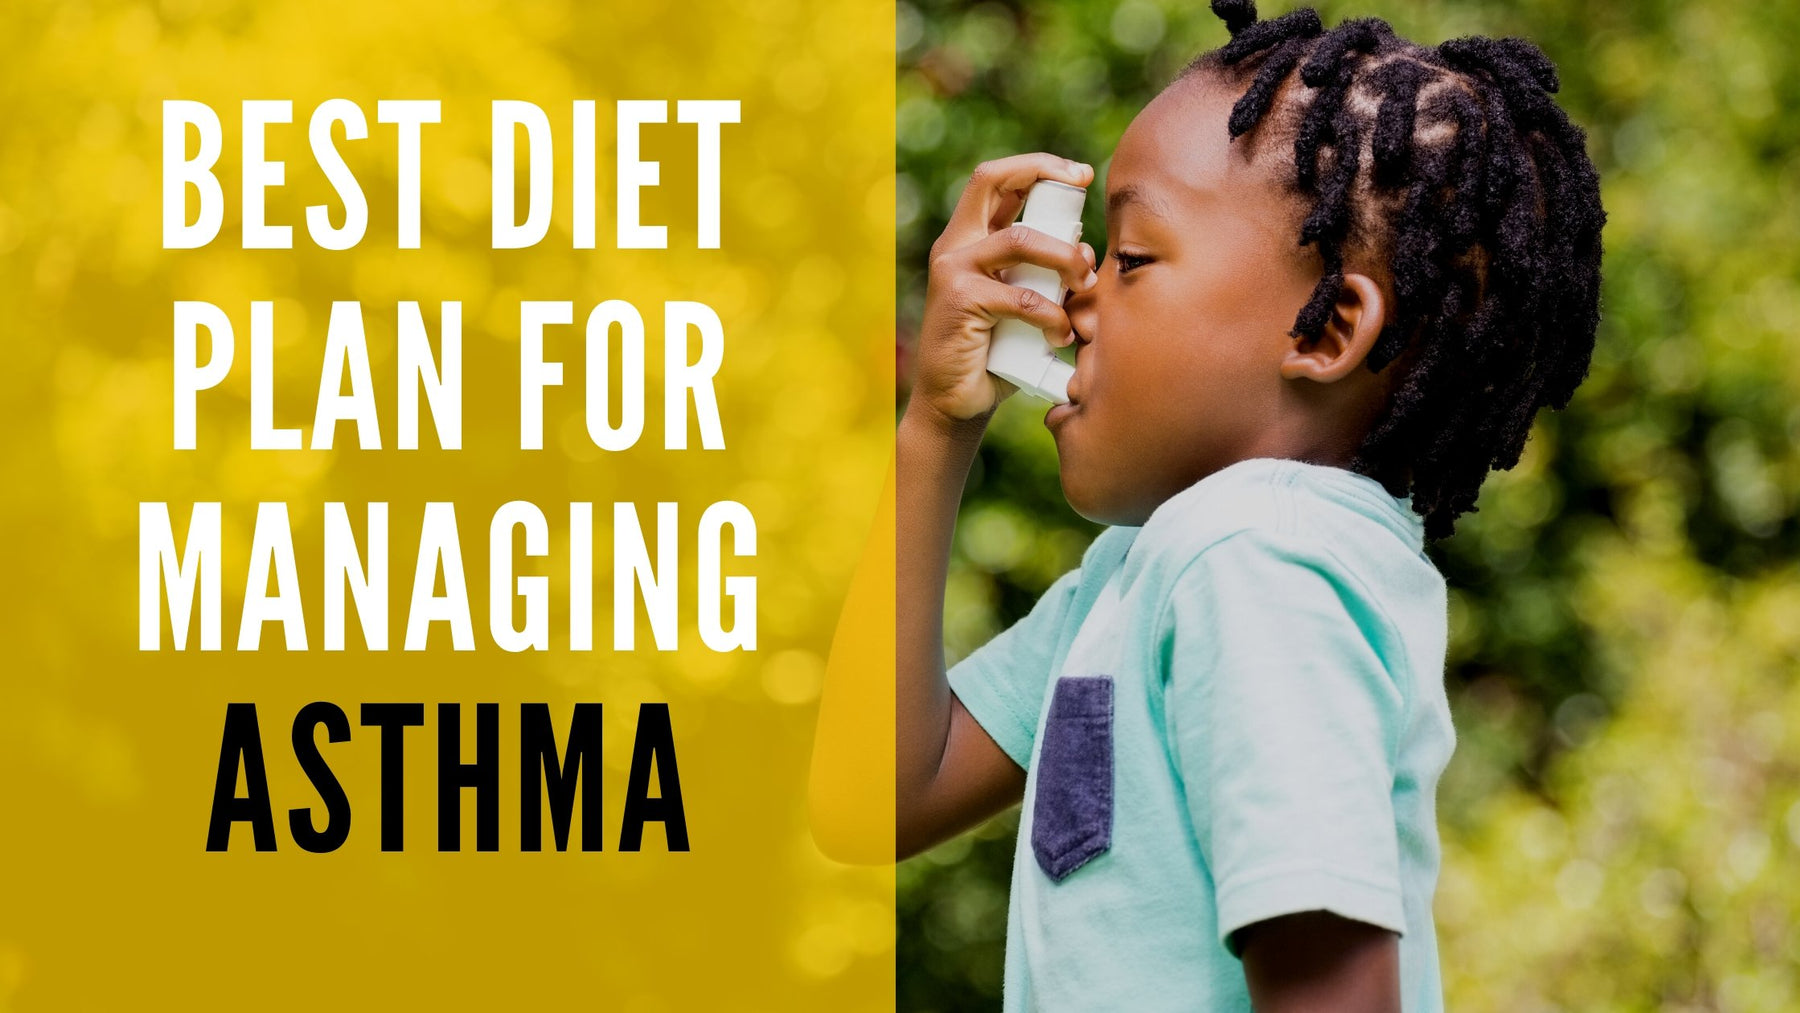 Indian Diet for Asthma Patients | Roshni Sanghvi